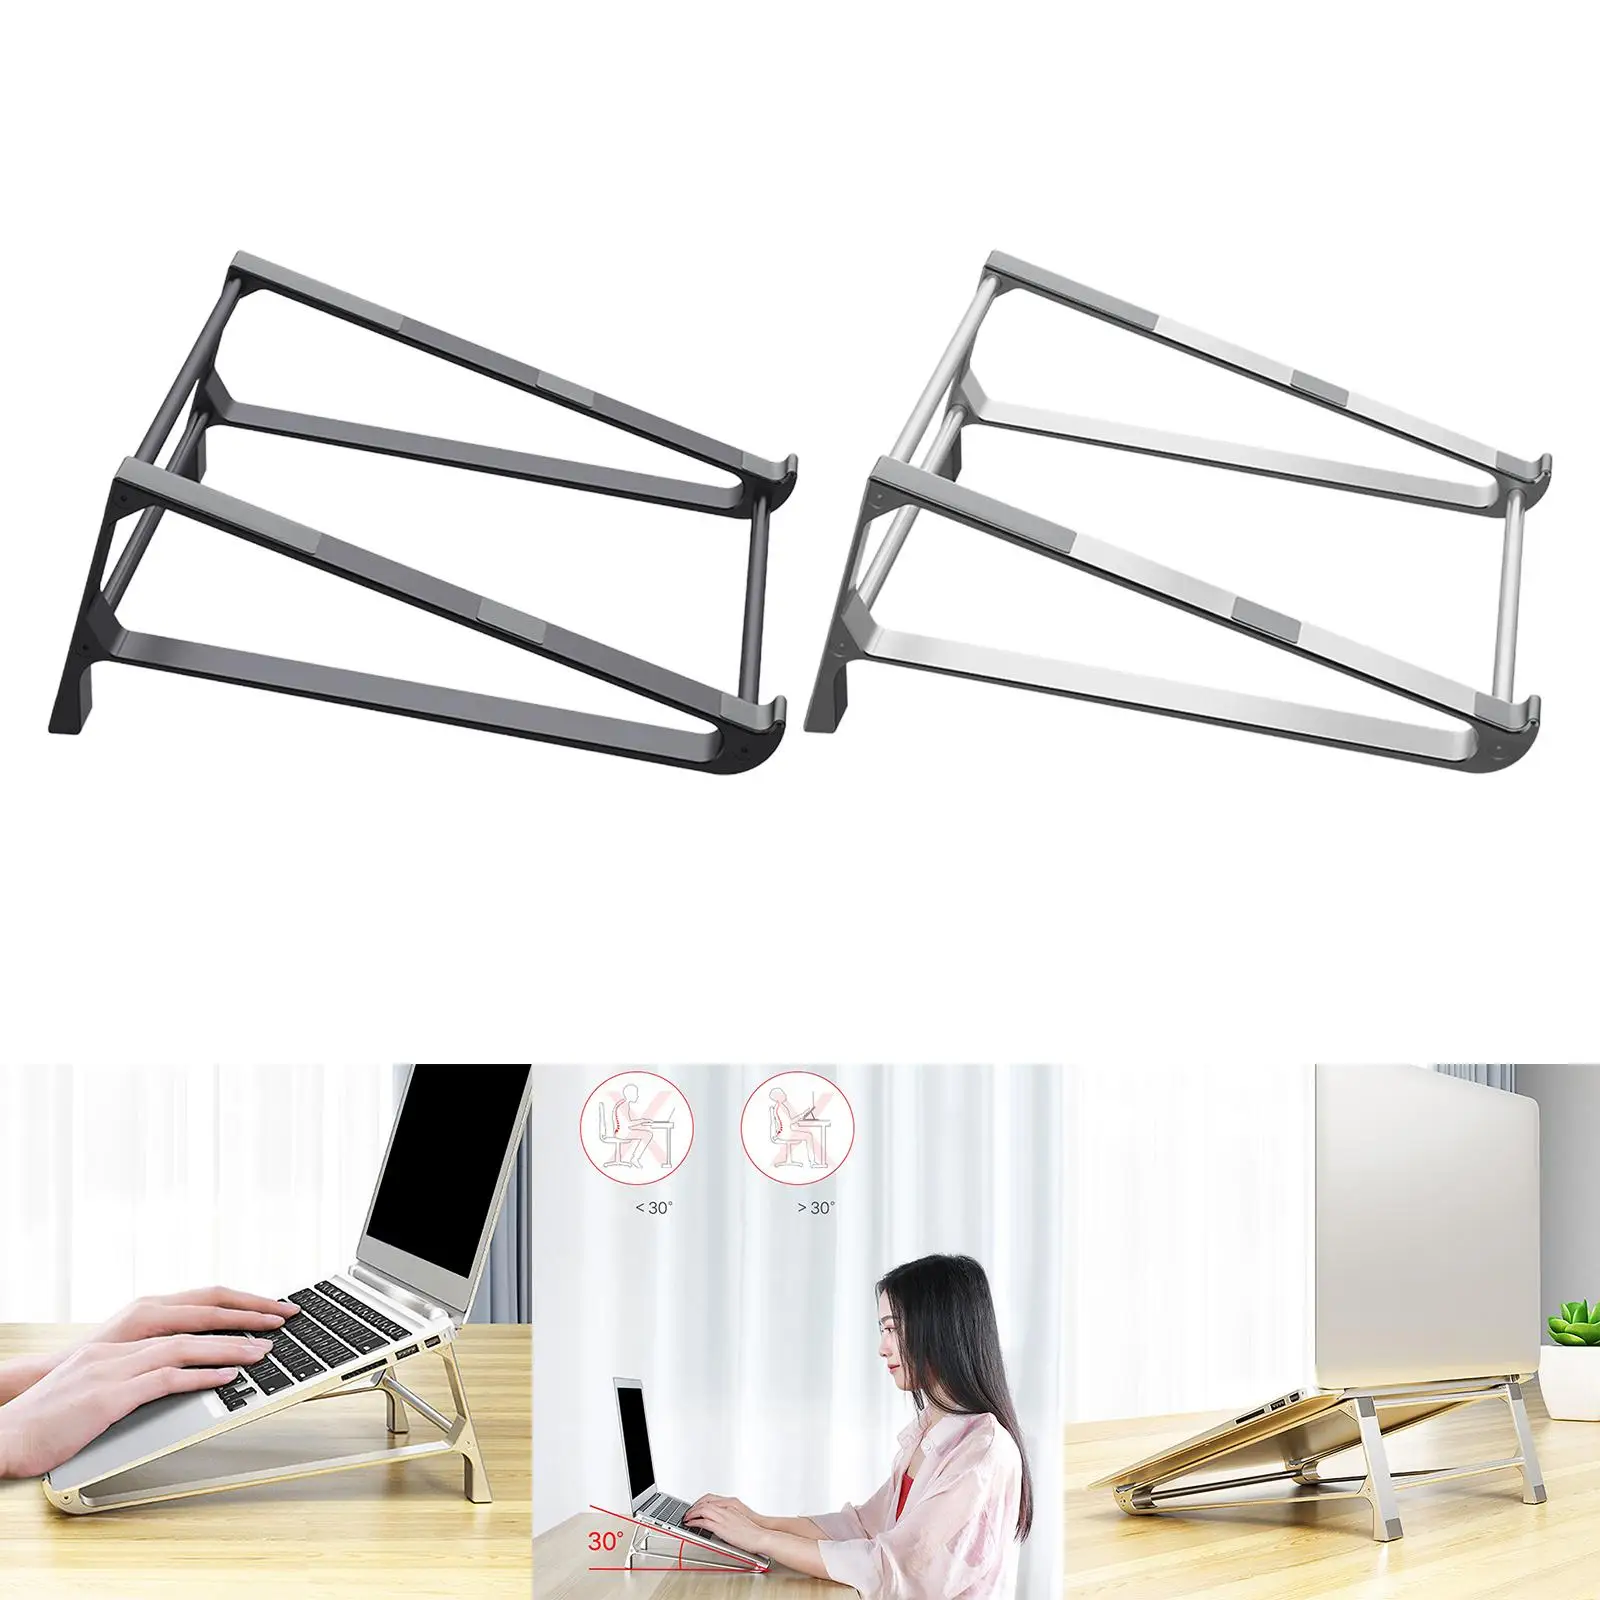 Aluminum Laptop Stand Non Slip 30 Angle Laptop Vertical Storage Stand Typing Videos Compatible with Most 11-15.6 Laptops